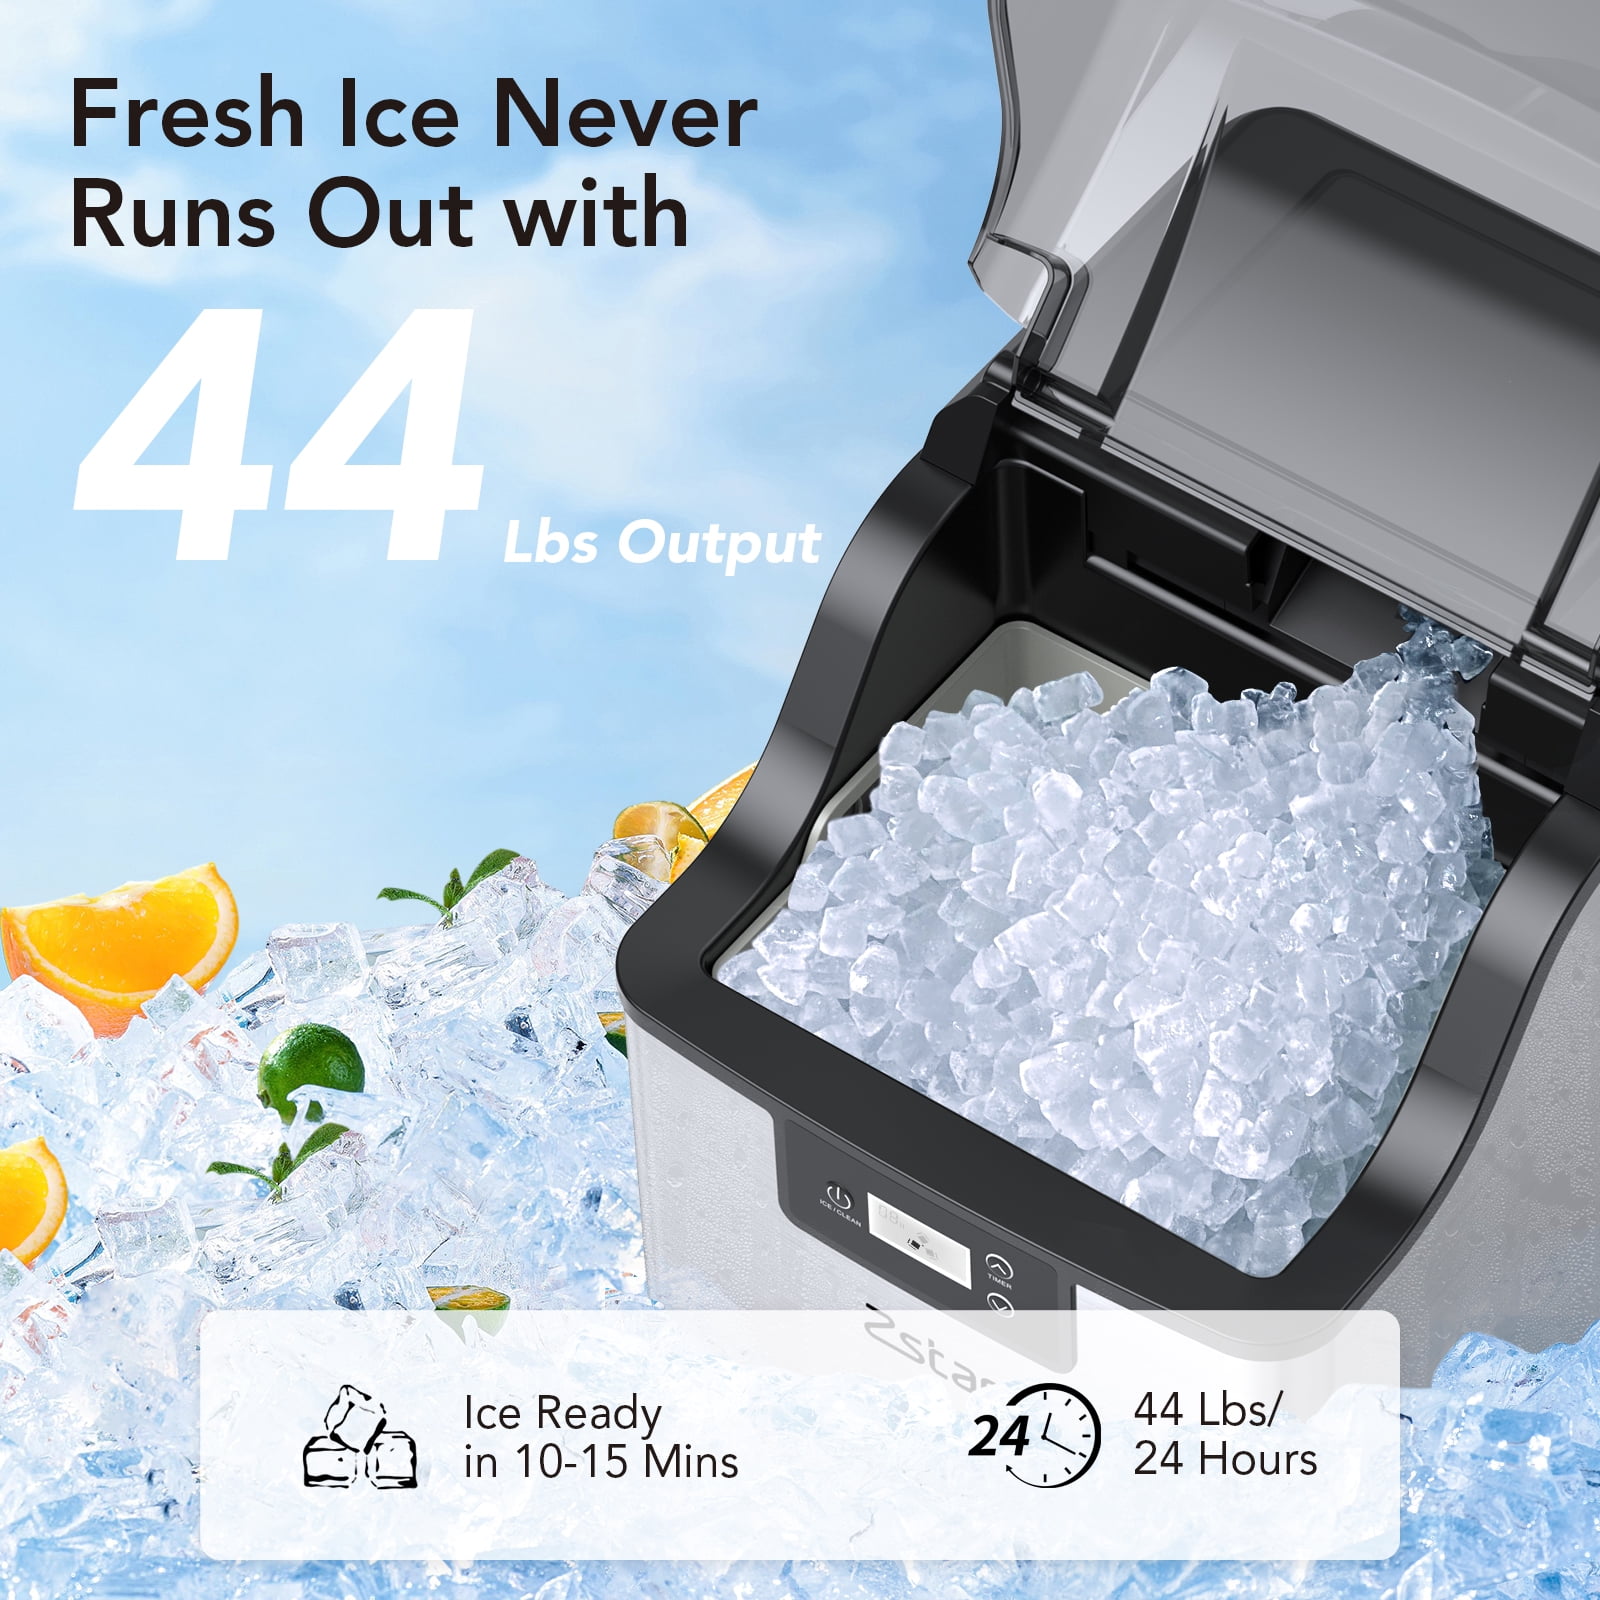 Get Sonic-style ice at home with these nugget ice makers – WWLP